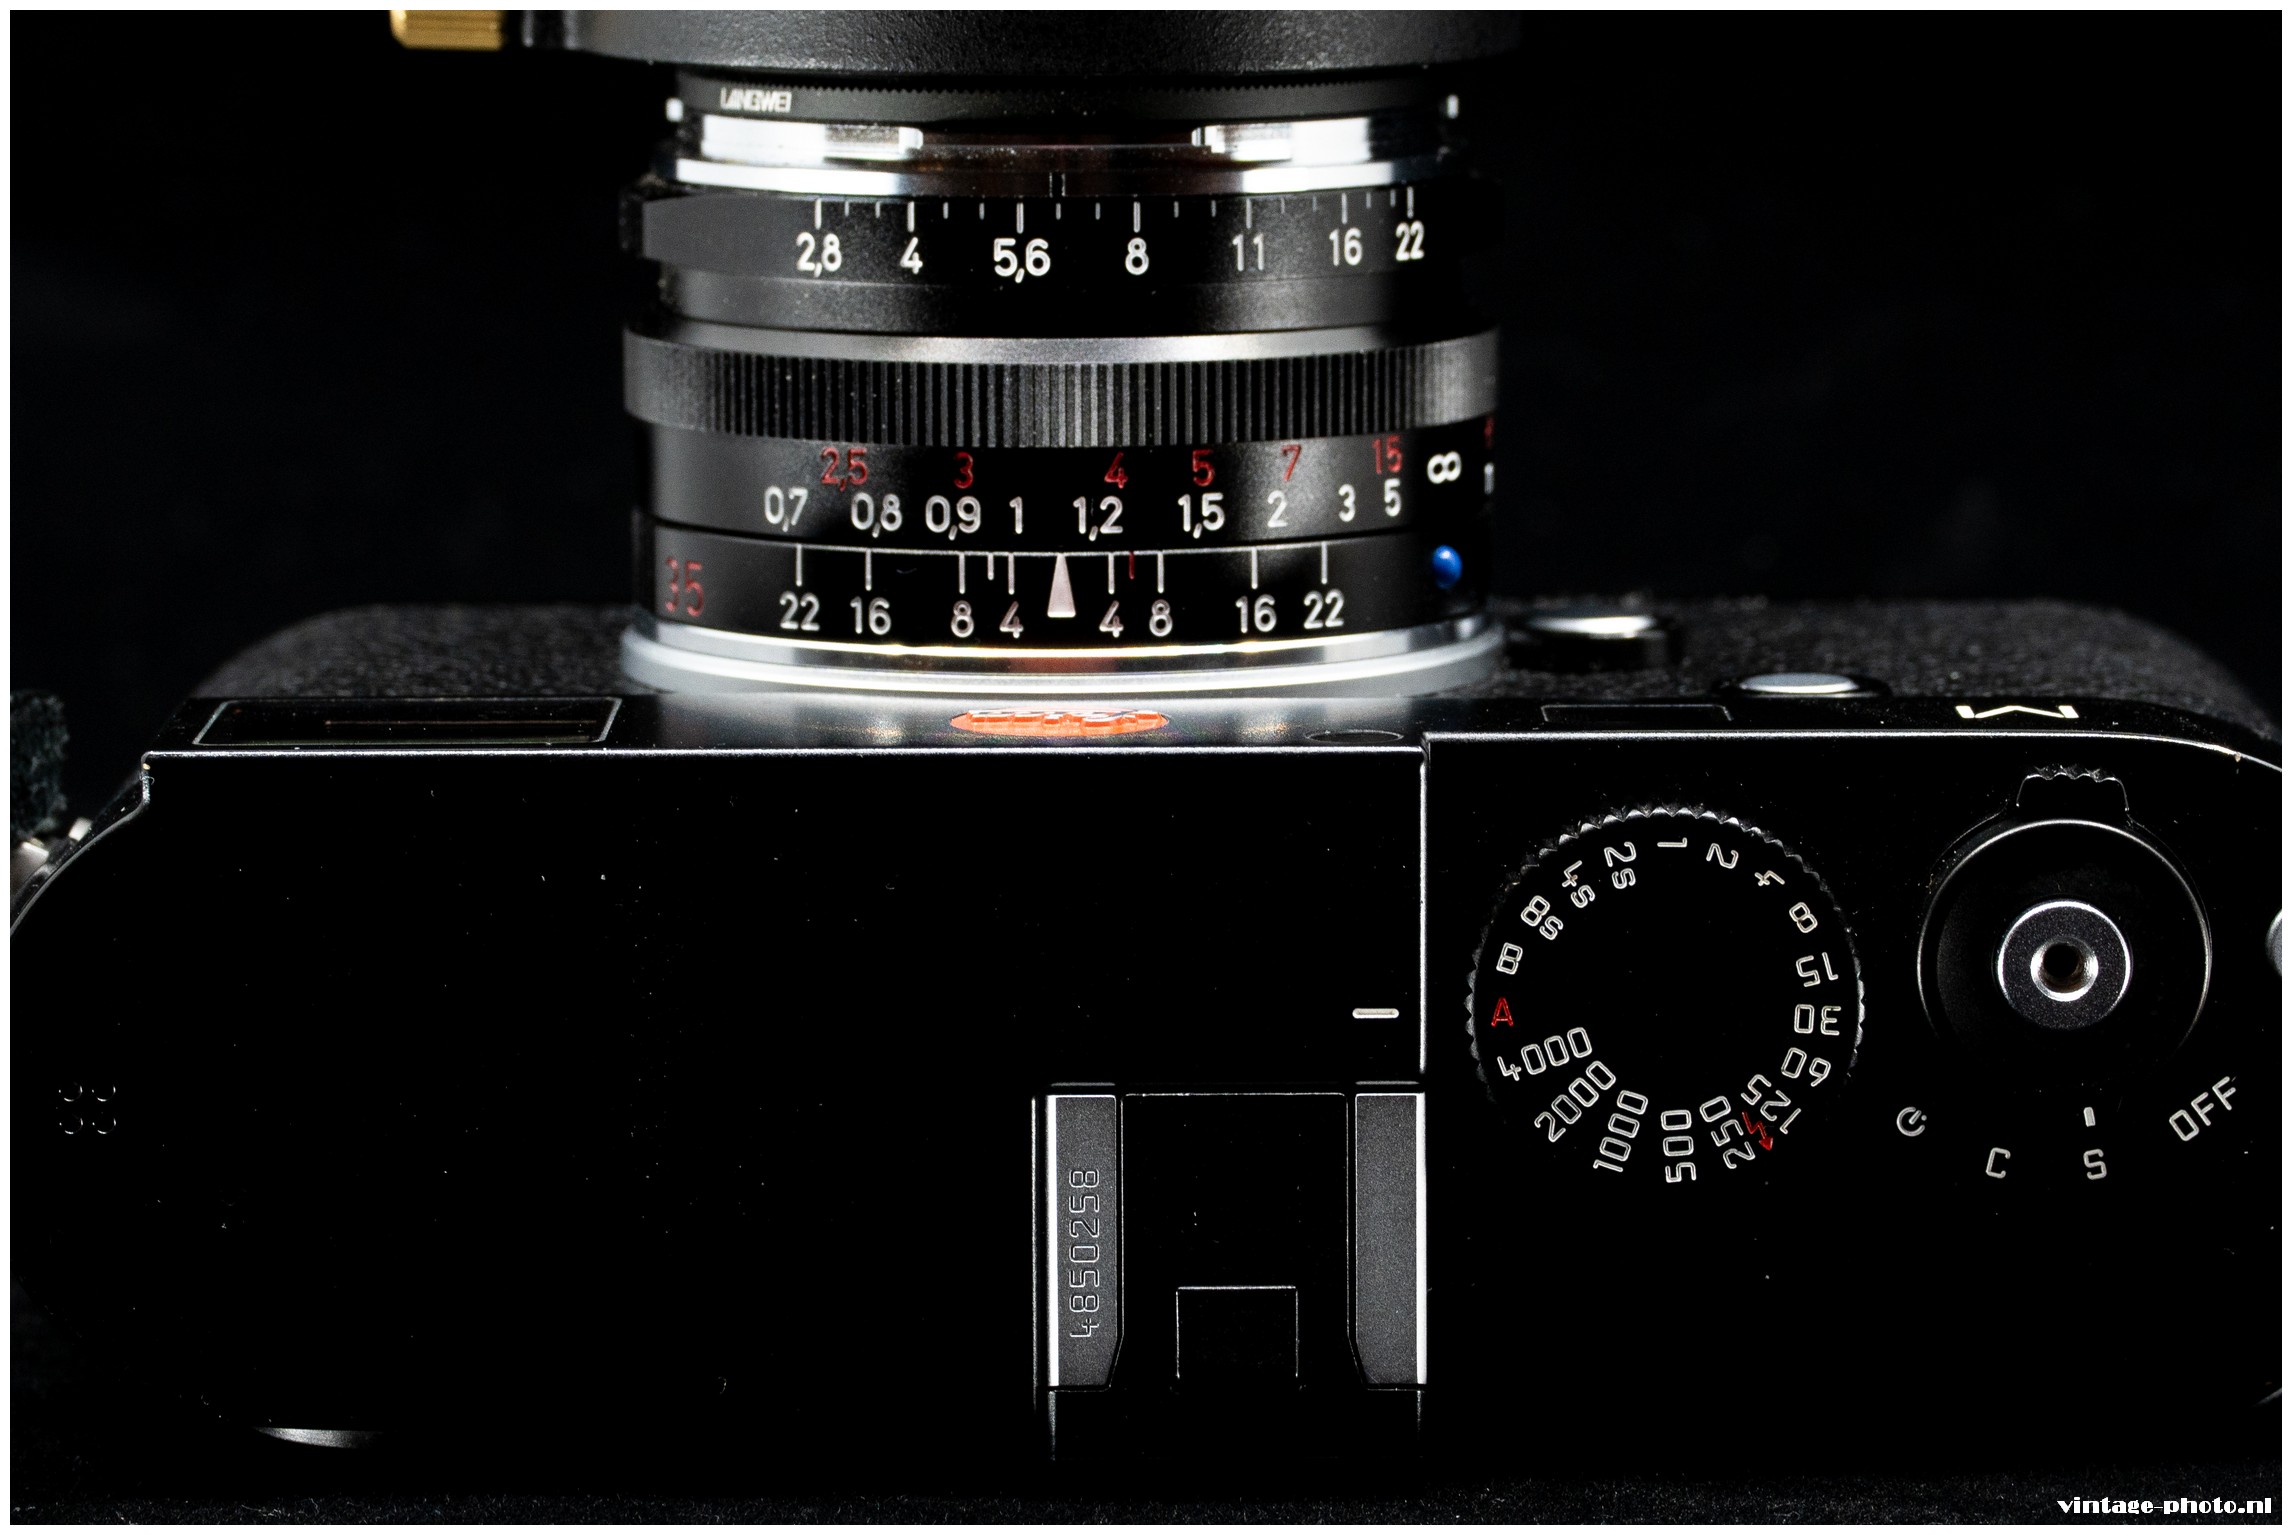 The indecisive moment – A personal review of the Leica M 240